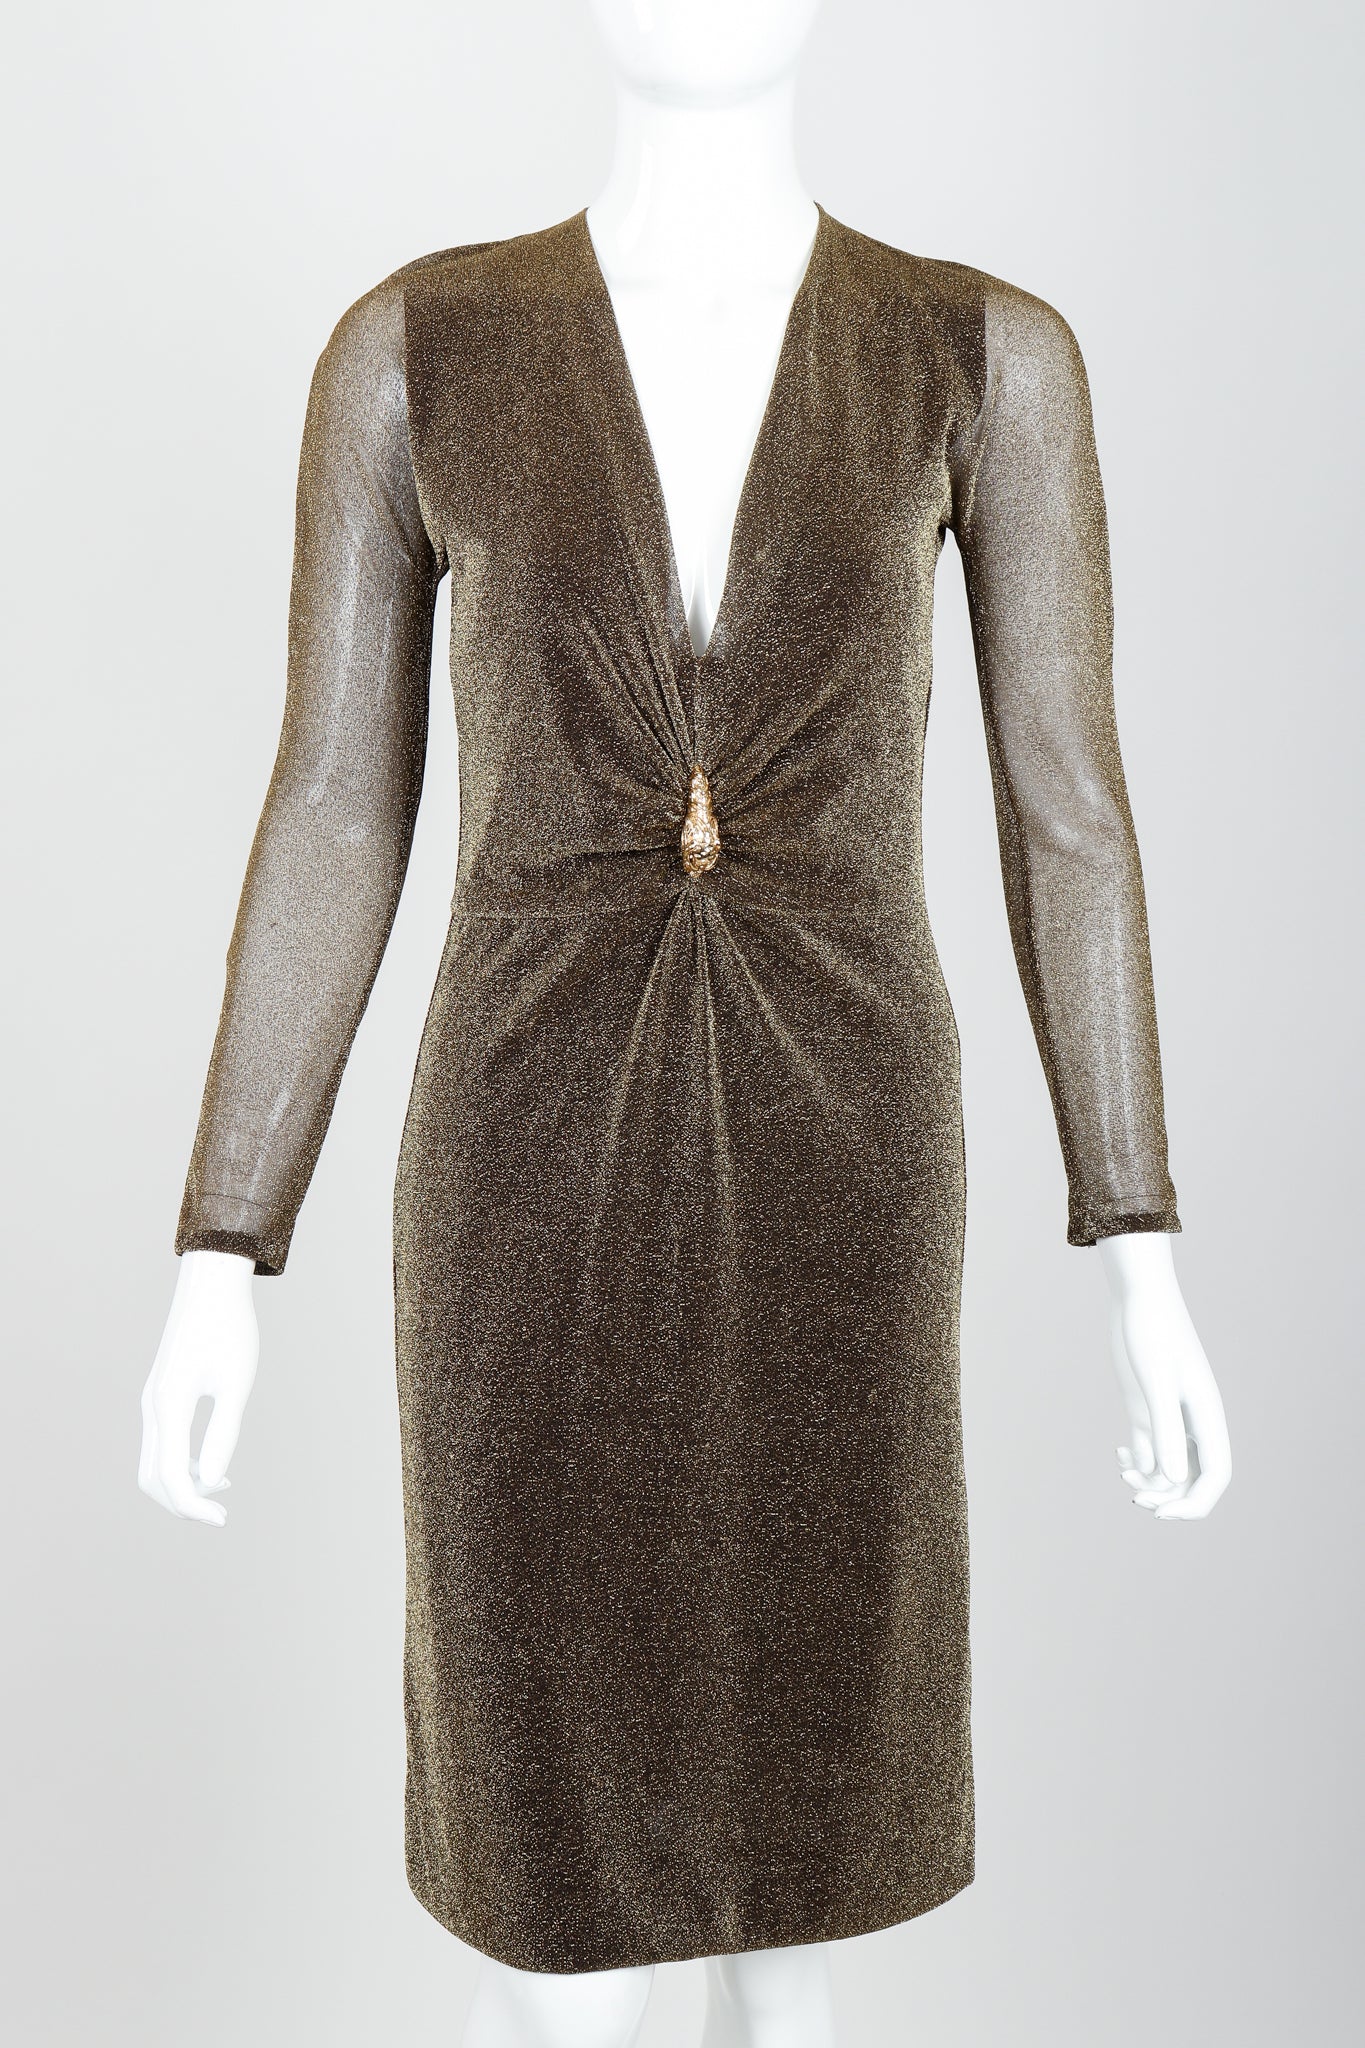 Vintage Gucci Tom Ford A/W 2000 Gold Lamé Dionysus Dress on Mannequin front crop at Recess LA